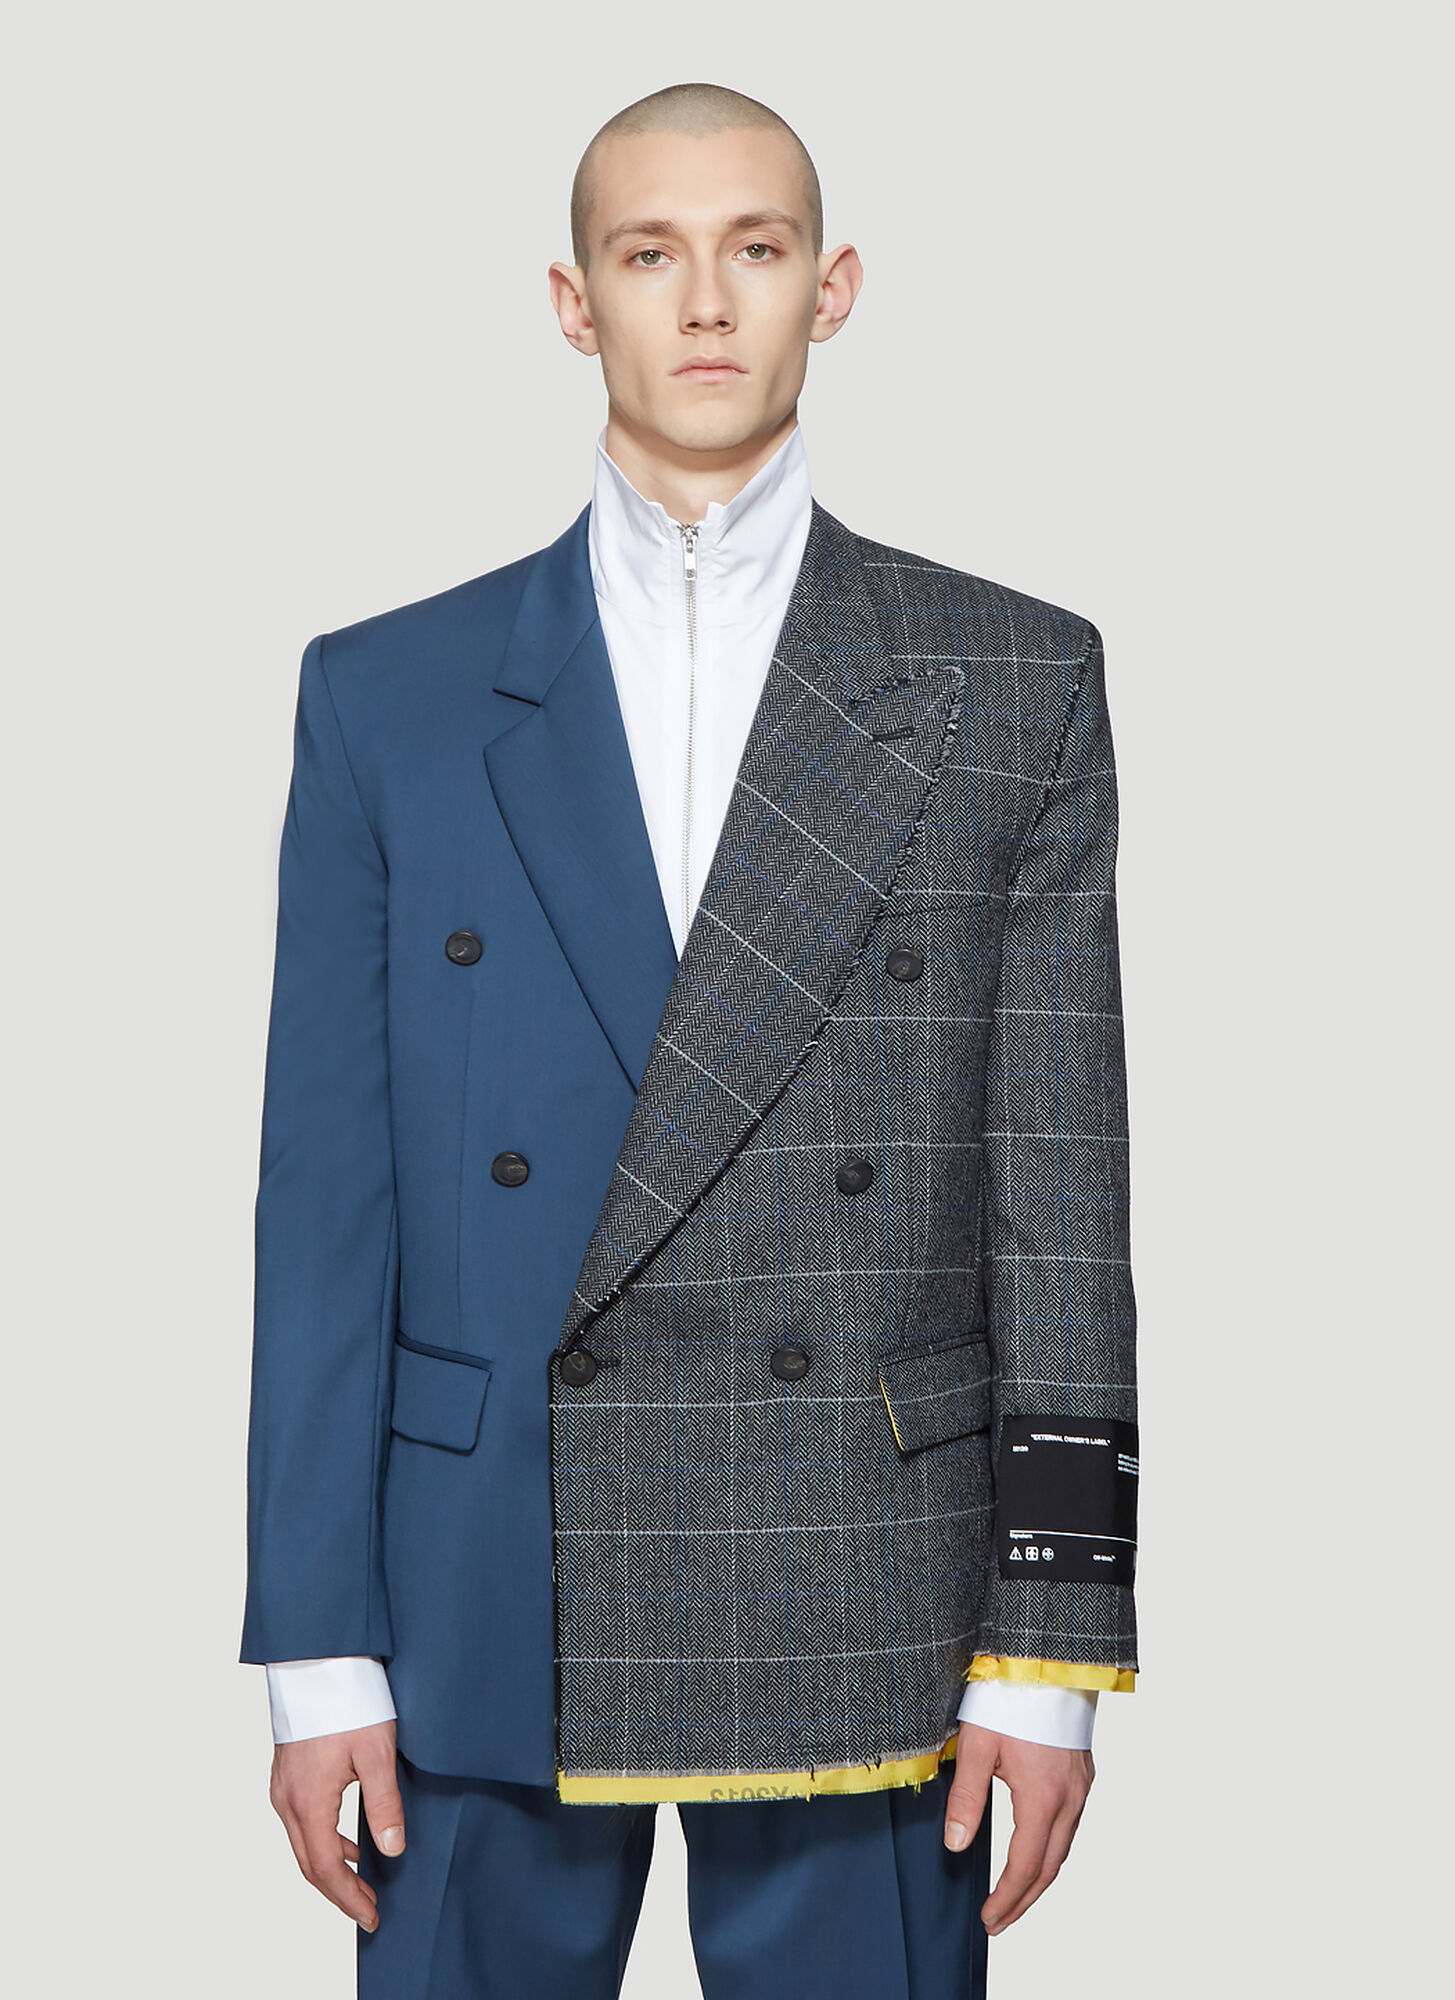 Off-White Reconstructed Tailored Blazer in Grey size EU – 48 | The ...